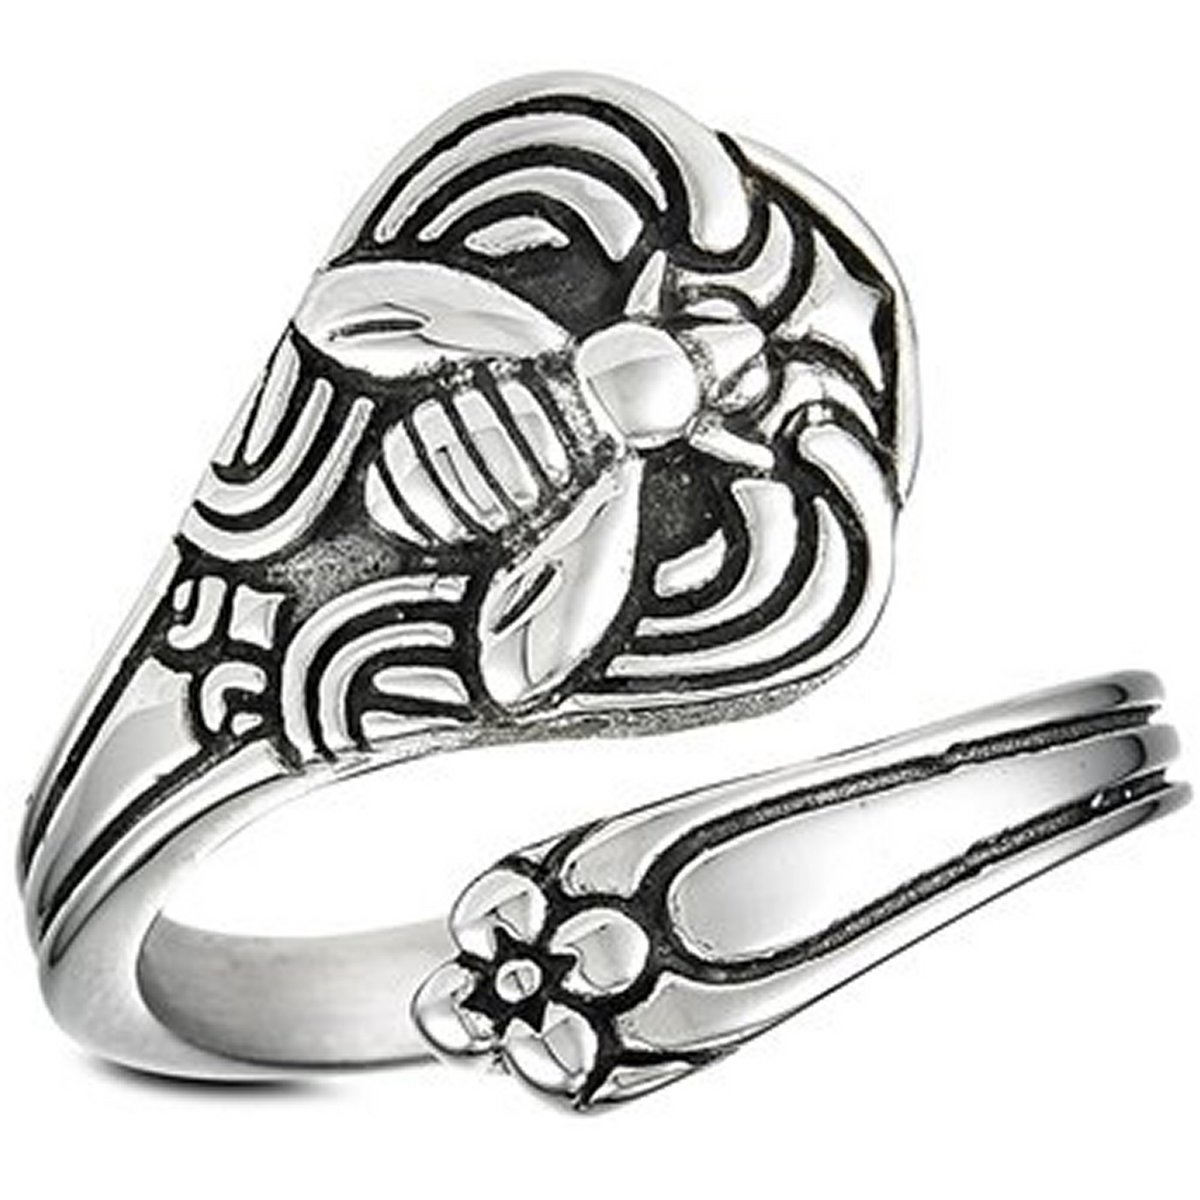 Back in stock! Bee Spoon Ring Silver Stainless Steel Garden Insect Boho Band. Order this bee spoon ring on our website: fantasyforgejewelry.com/a/s/products/b…

#spoonring #bee #bohostyle #bohemianstyle #womensfashion #FantasyForgeJewelry